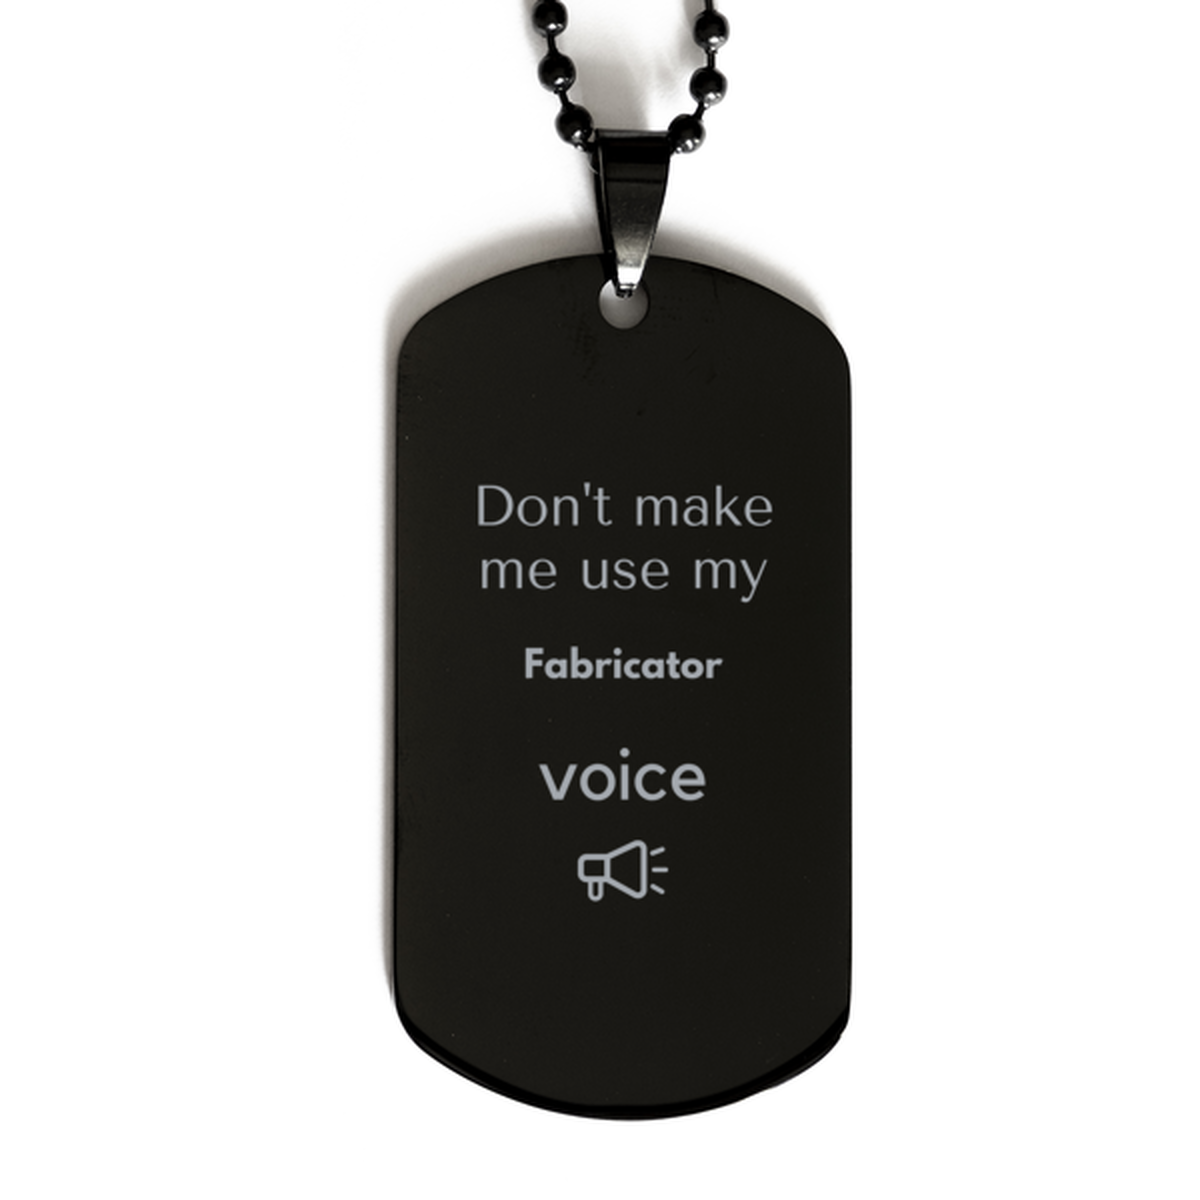 Don't make me use my Fabricator voice, Sarcasm Fabricator Gifts, Christmas Fabricator Black Dog Tag Birthday Unique Gifts For Fabricator Coworkers, Men, Women, Colleague, Friends